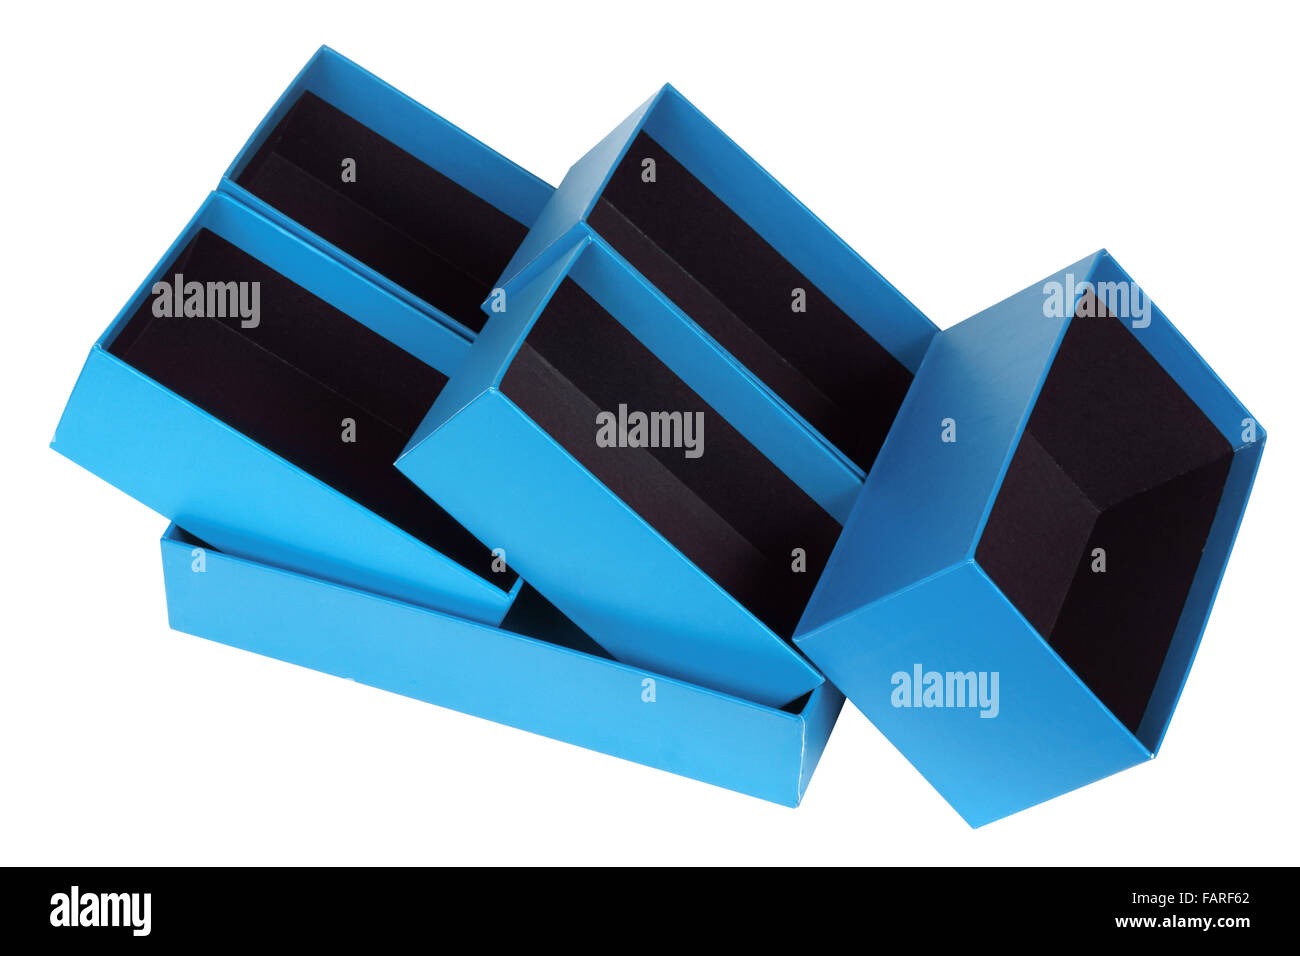 Packing gift cardboard boxes of alternative gentle blue color composition. With a black velvet inside. Isolated on white Stock Photo